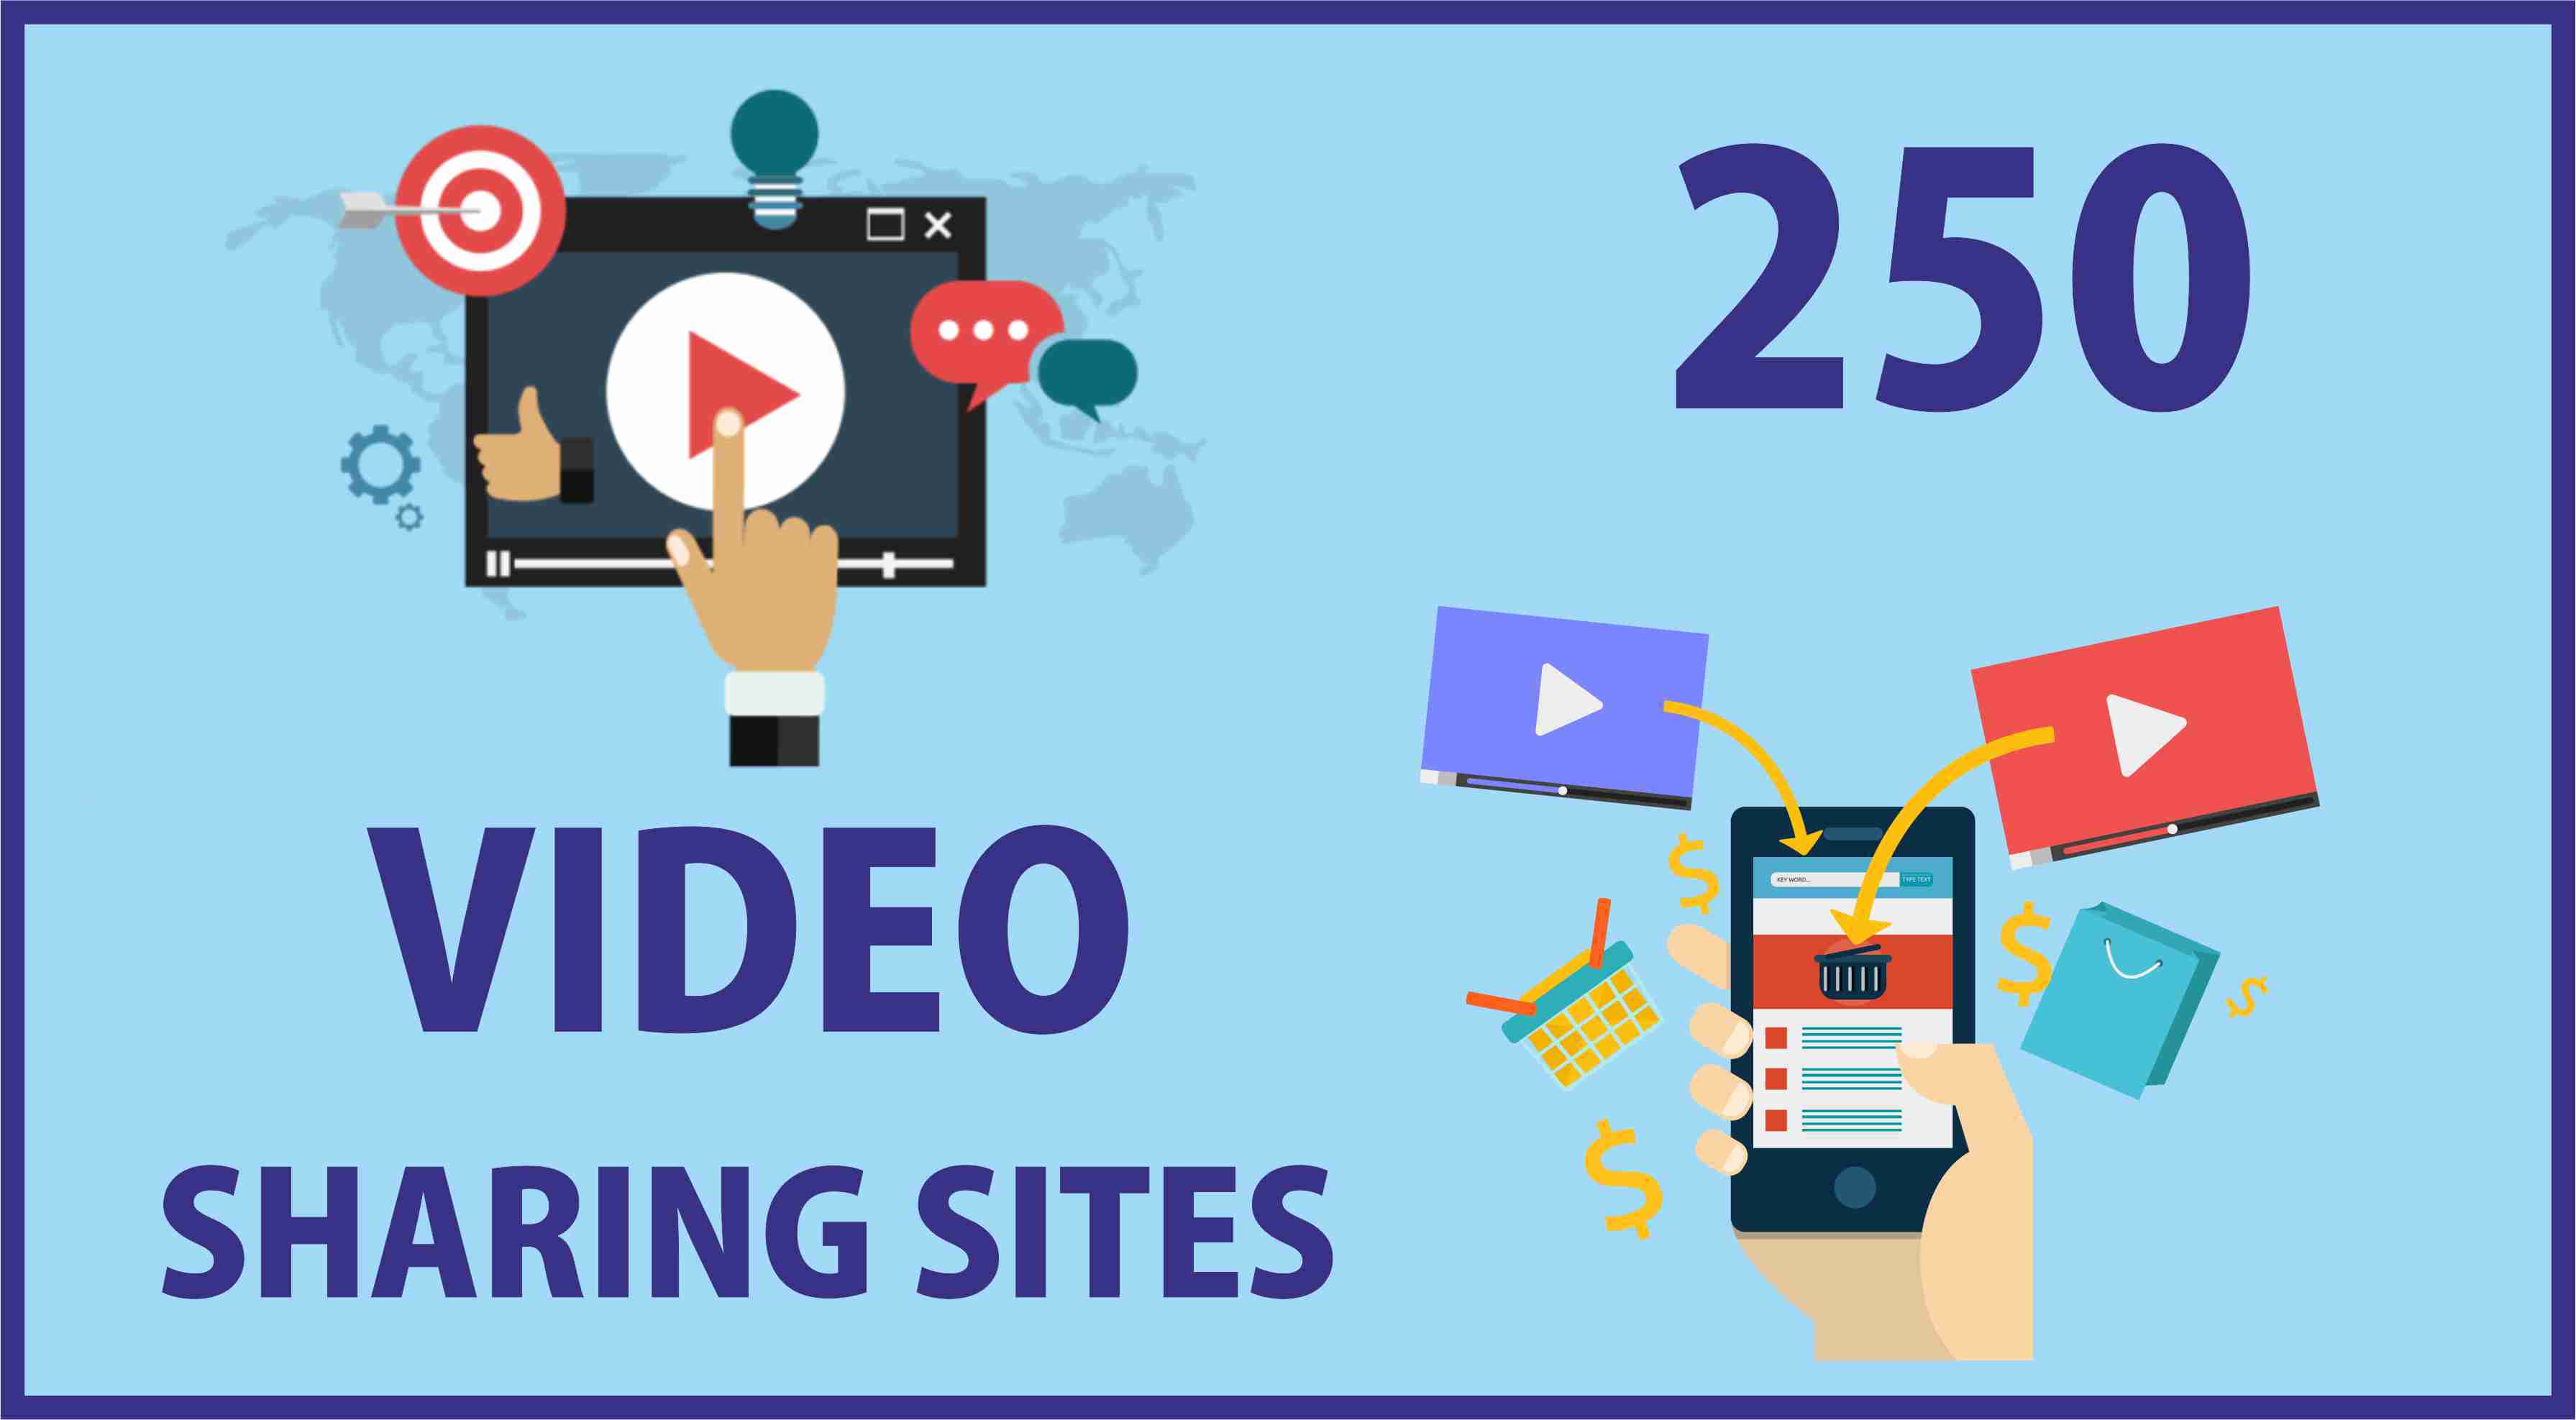 250  Video Sharing Sites for $1 pic